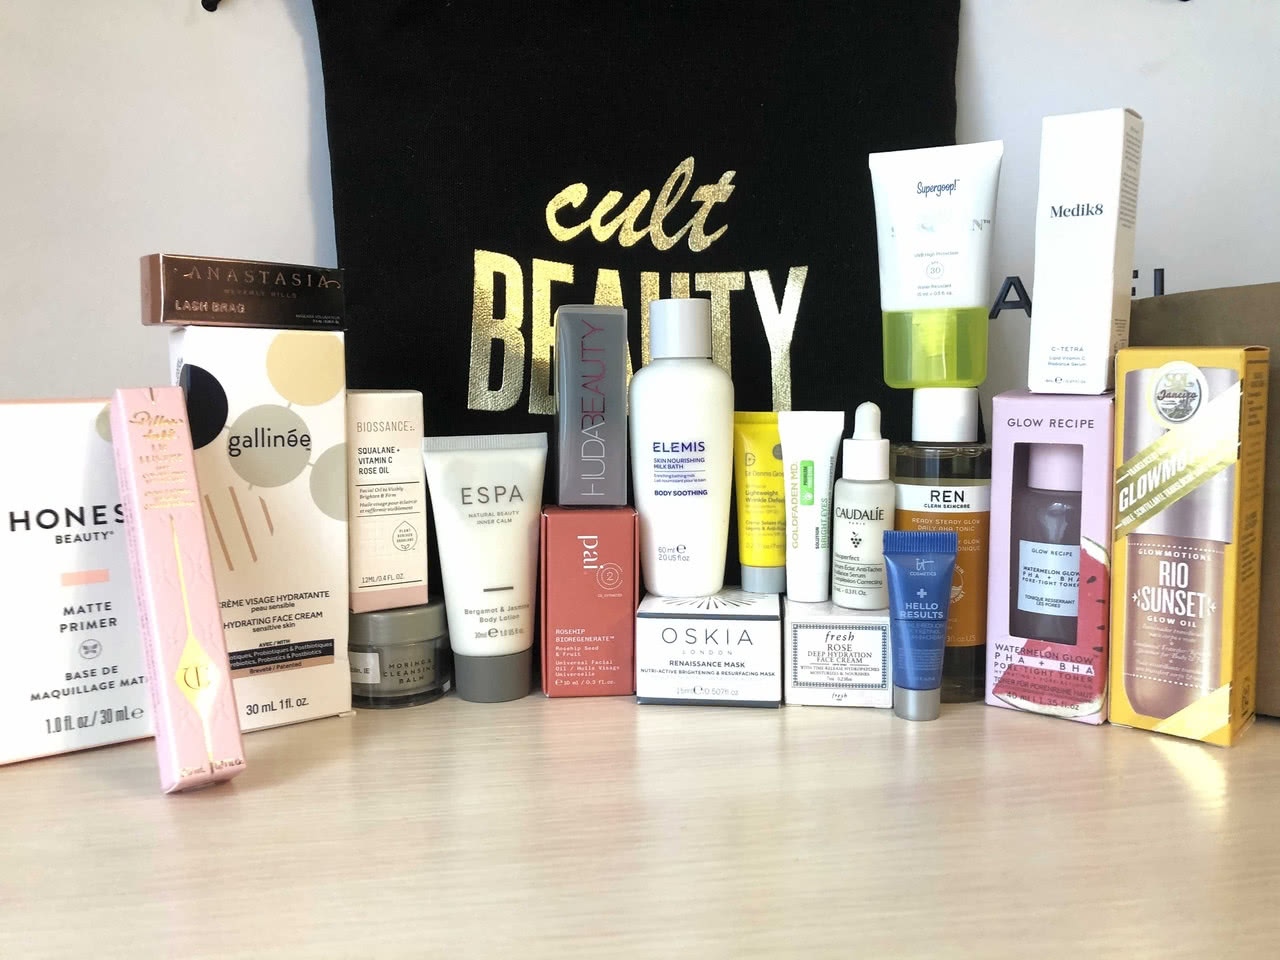 Cult Beauty The Tried And Tested Goody Bag  в наличии